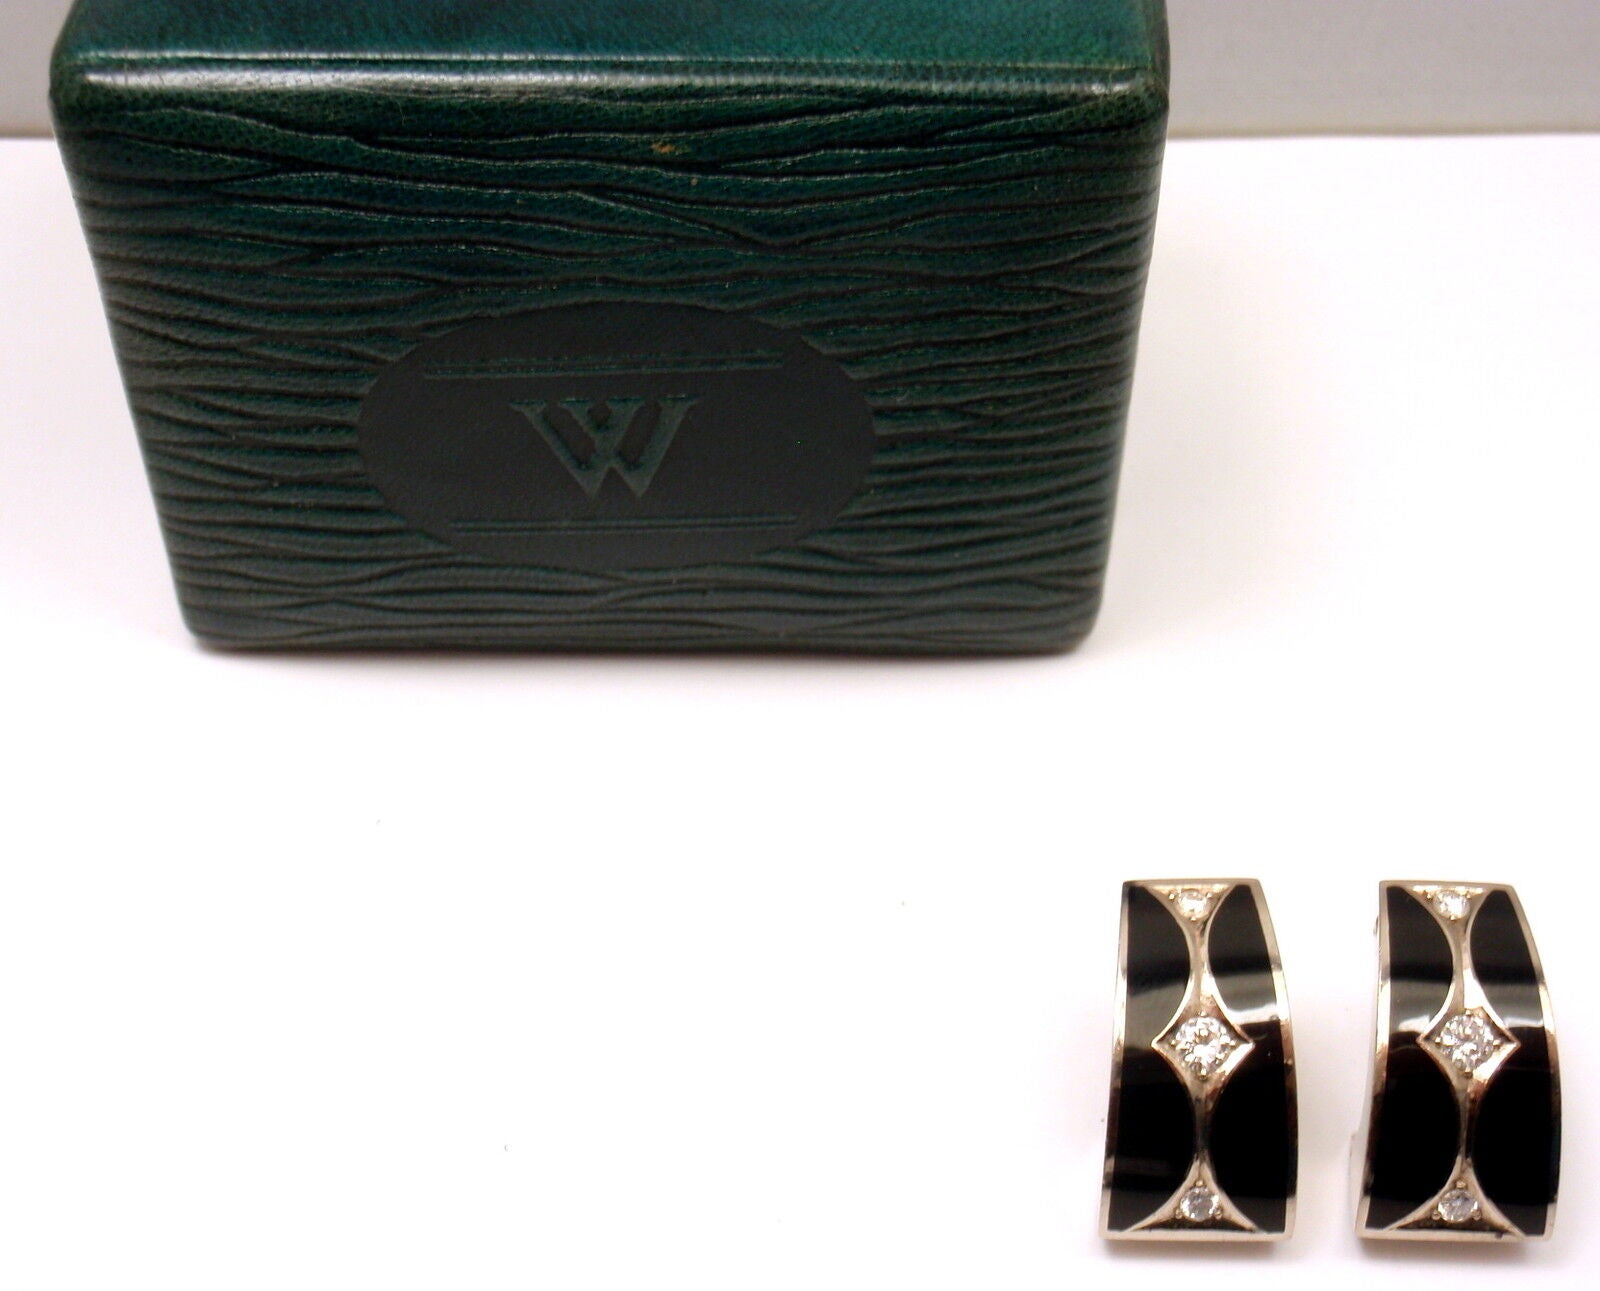 Fortrove Jewelry & Watches:Fashion Jewelry:Earrings STEPHEN WEBSTER 18K WHITE GOLD DIAMOND BLACK ENAMEL EARRINGS WITH BOX